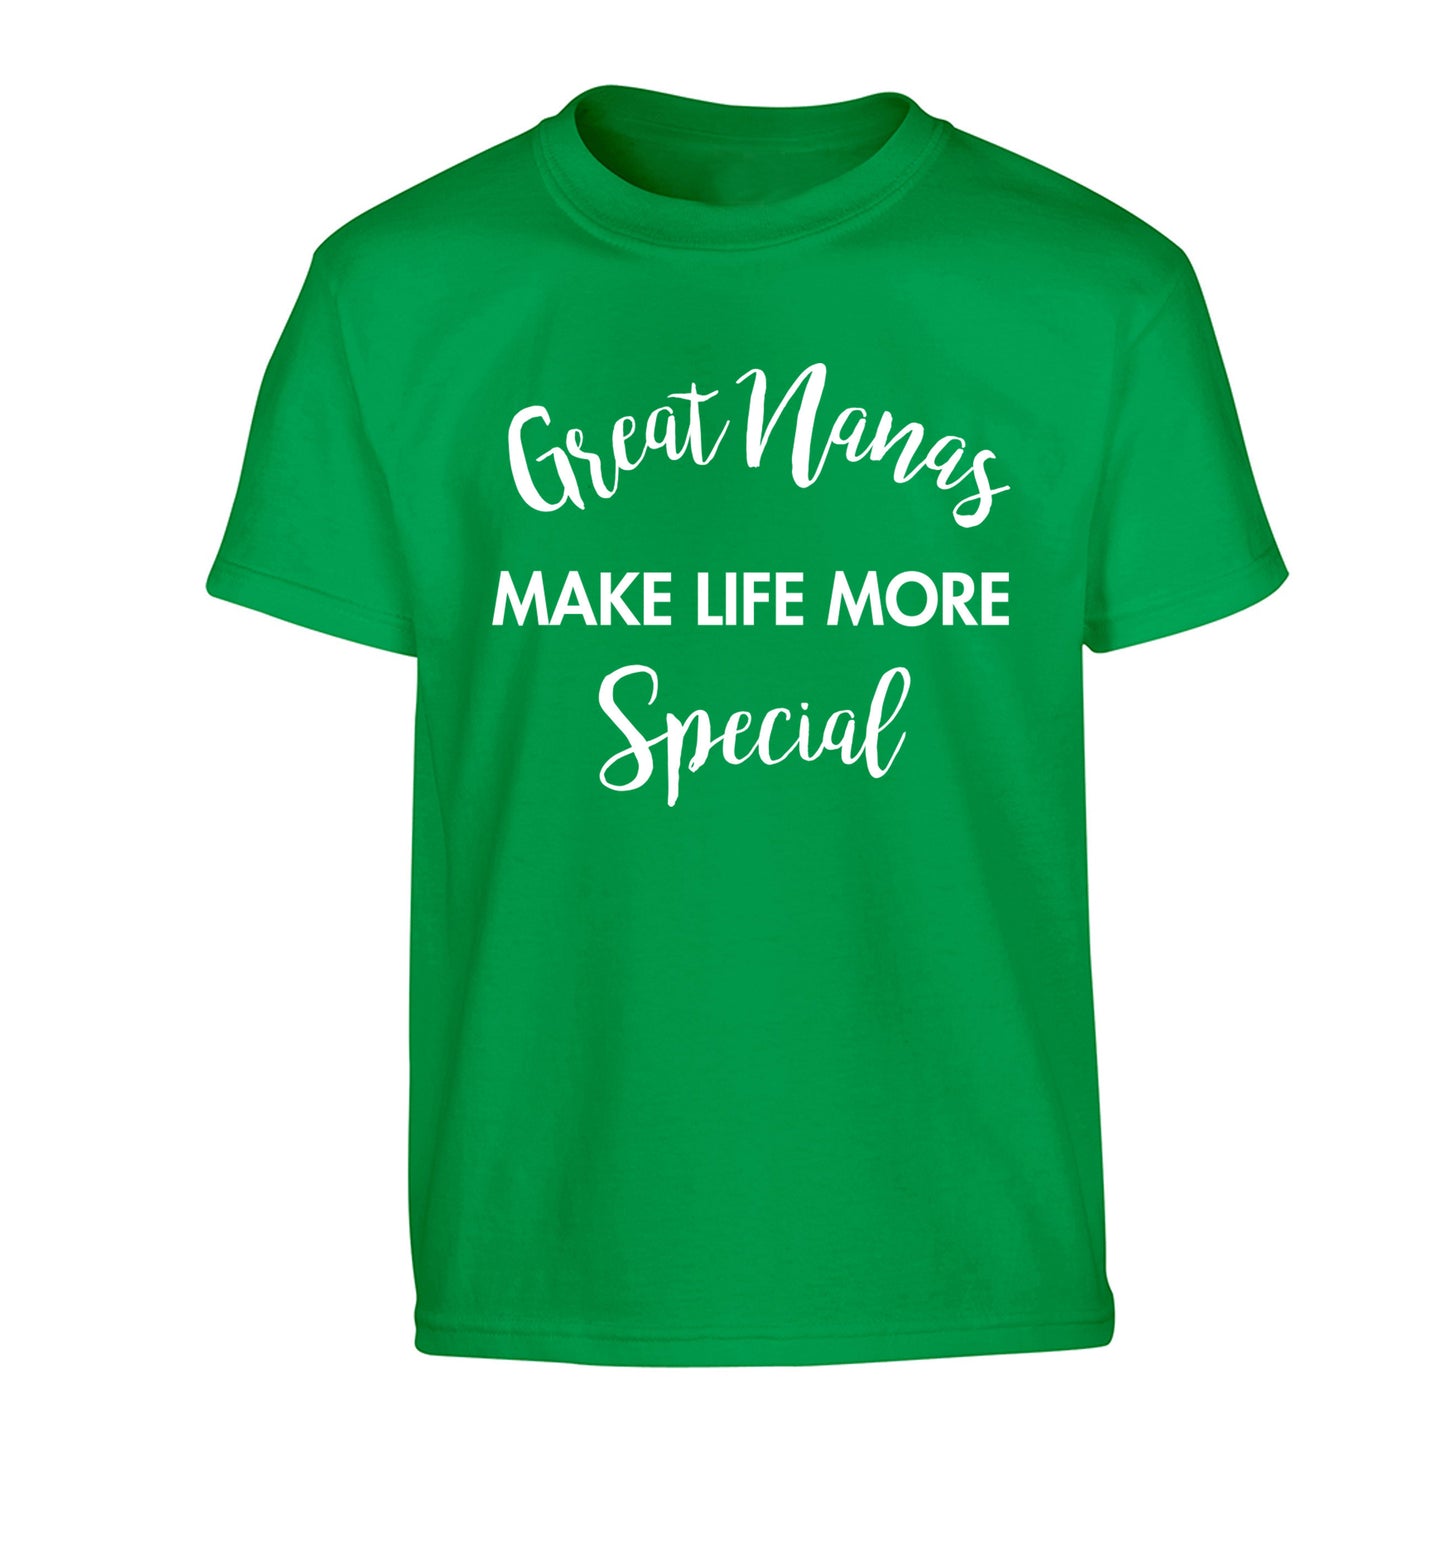 Great nanas make life more special Children's green Tshirt 12-14 Years